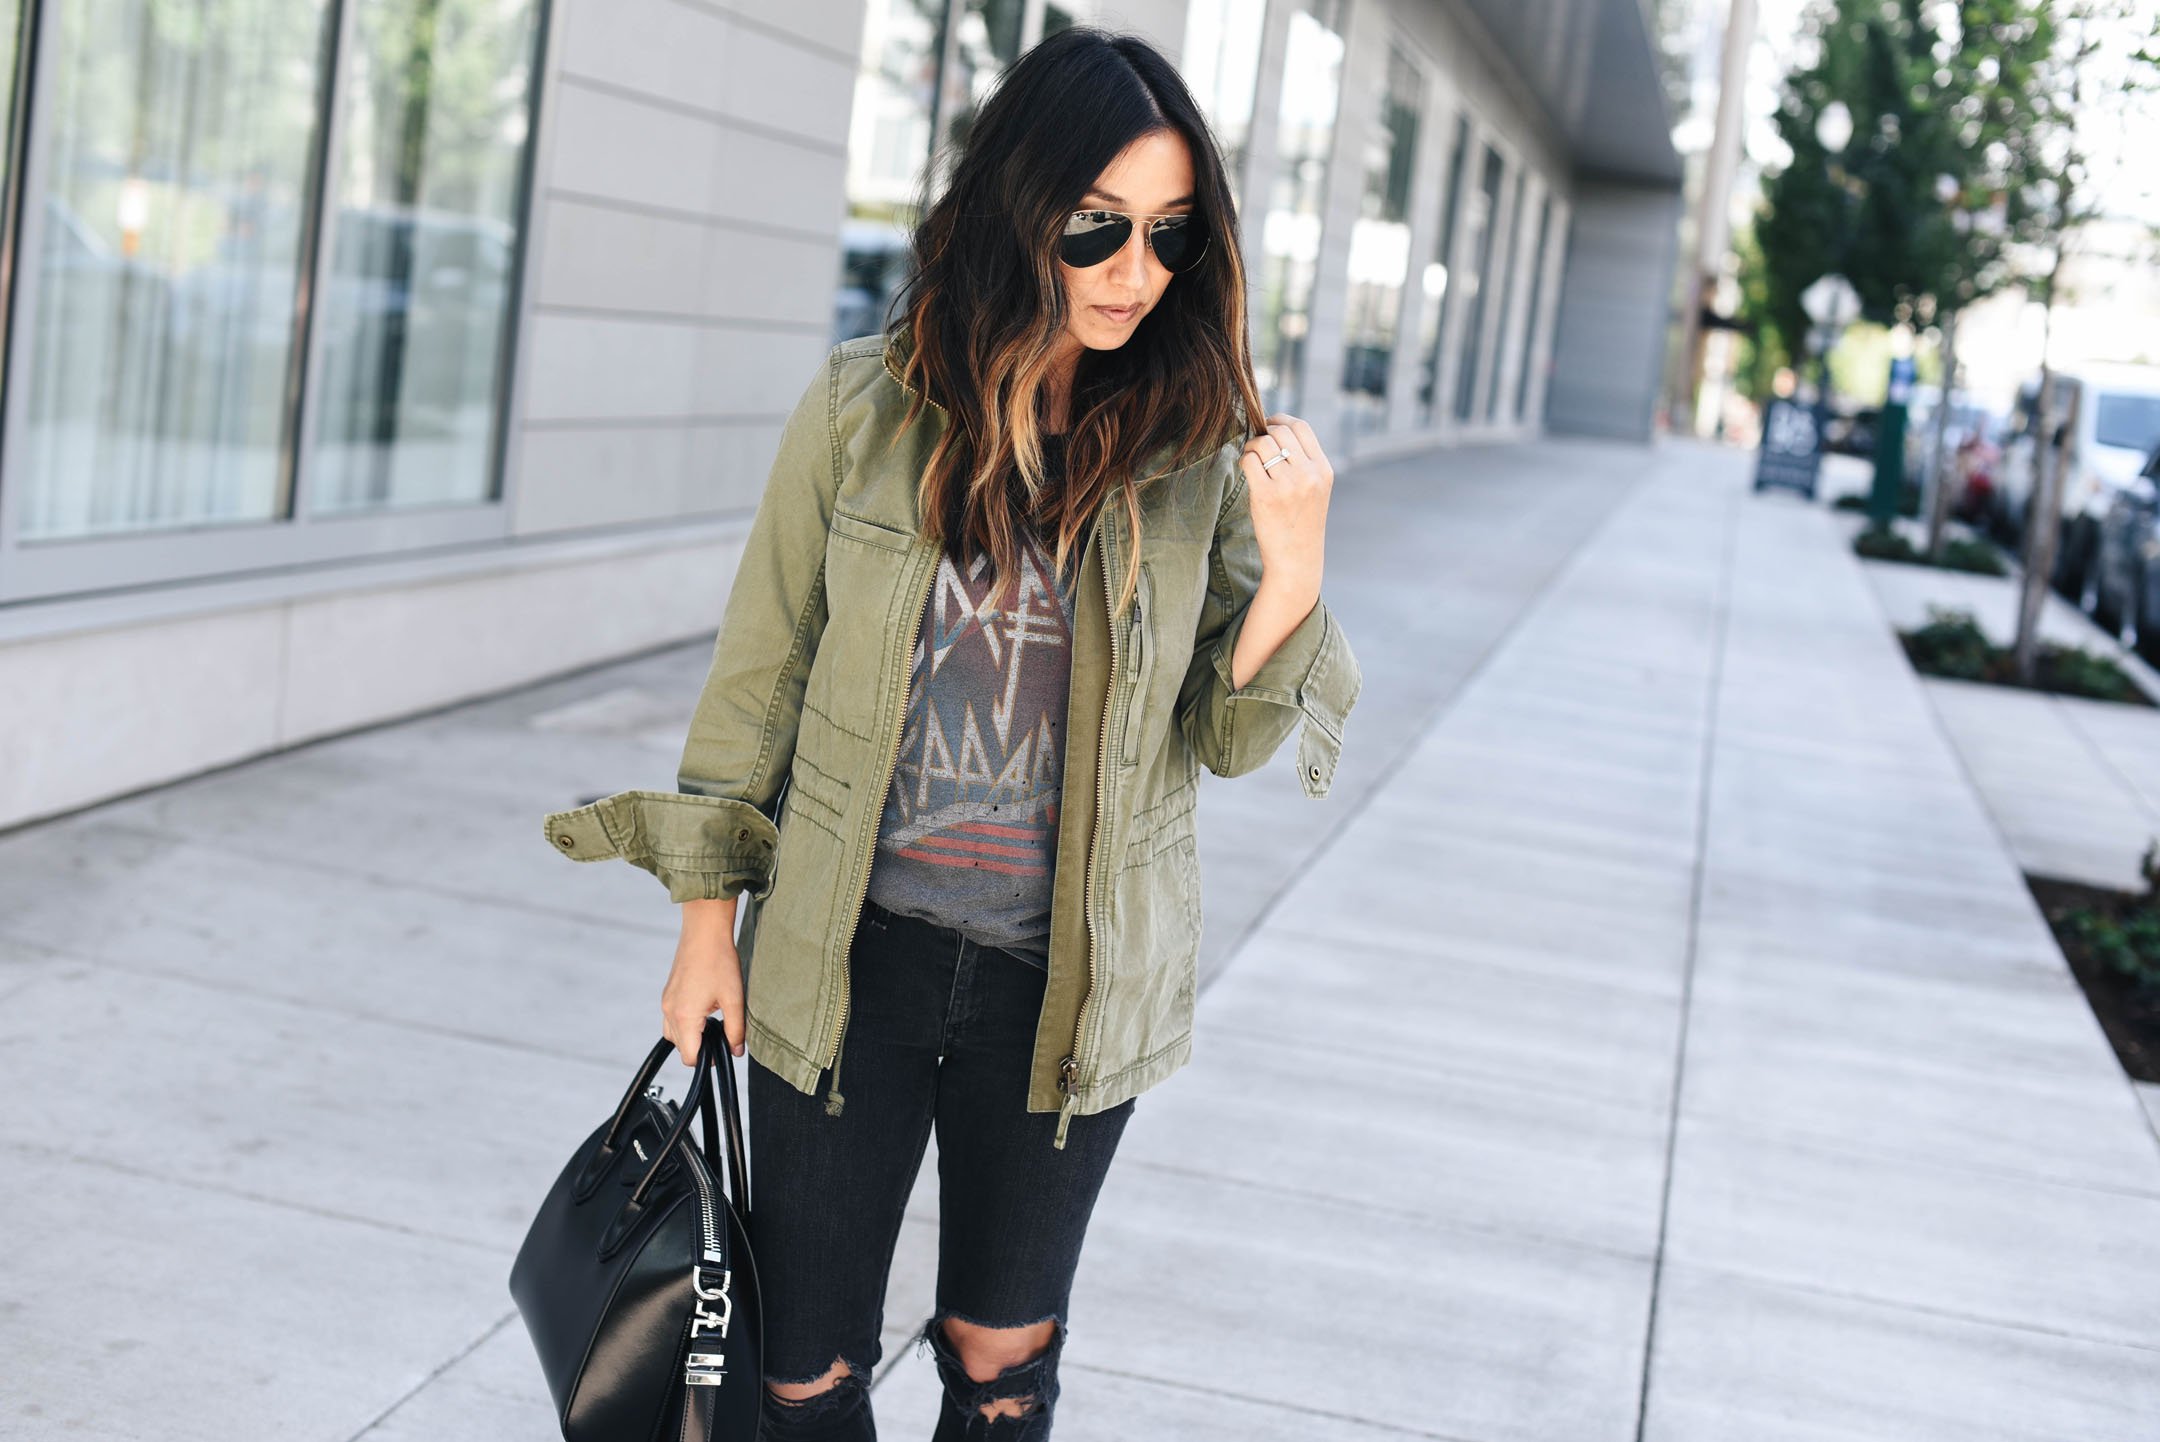 How to style rocker tees